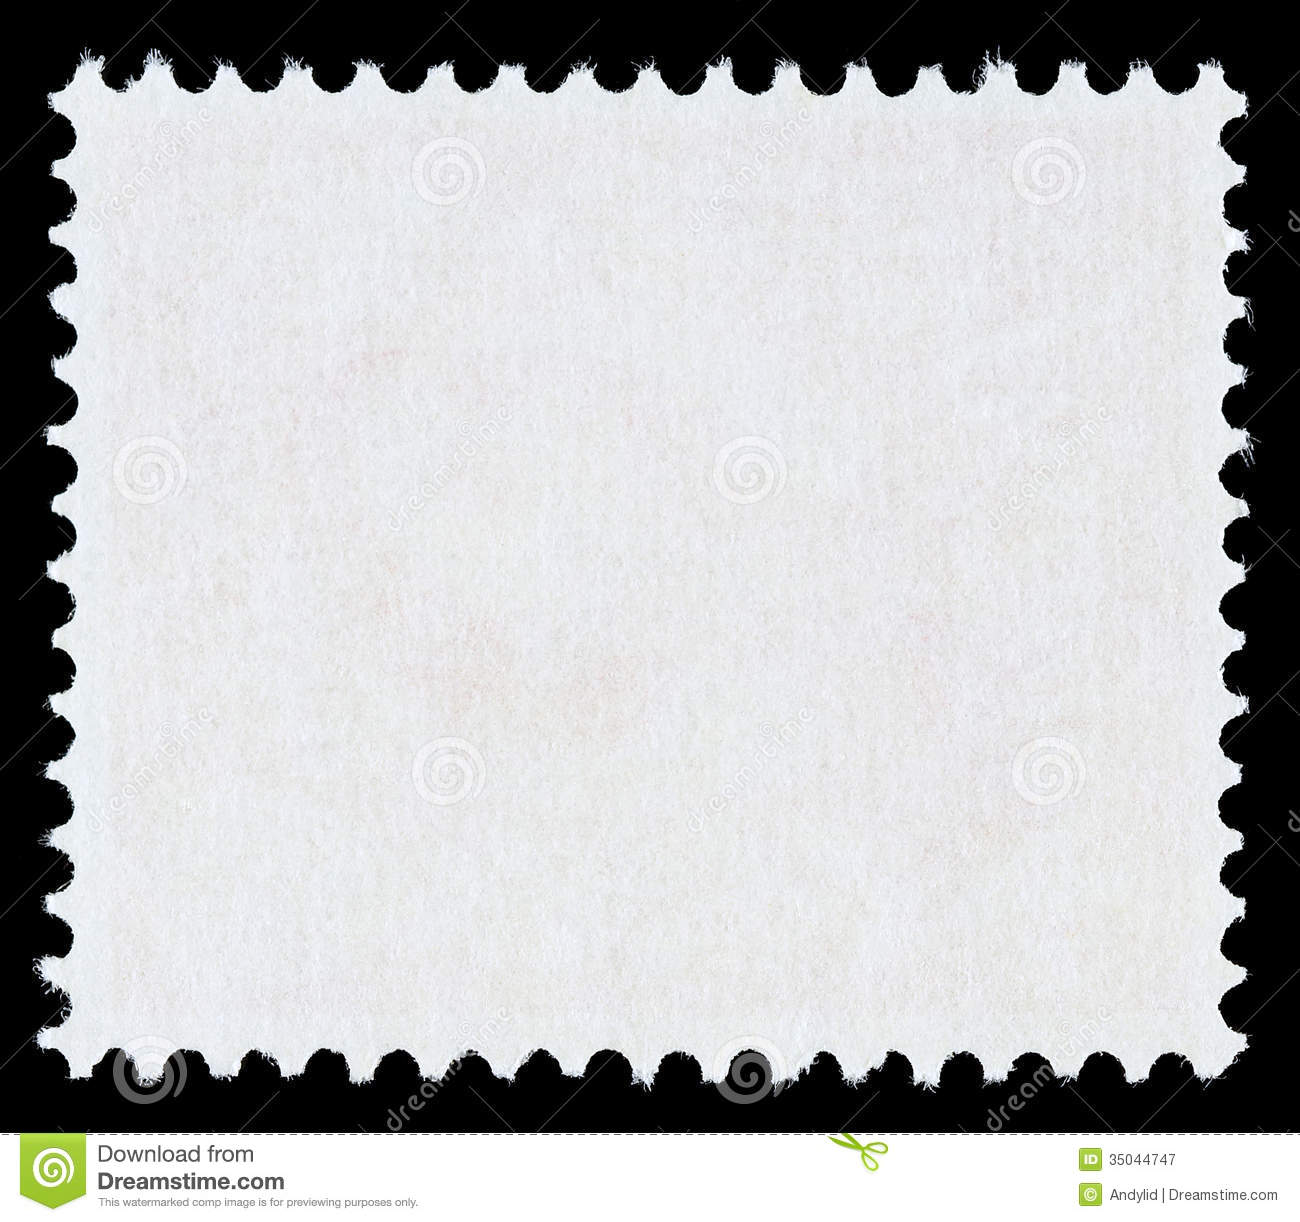 Blank White Postage Stamp Template Isolated On Black Background